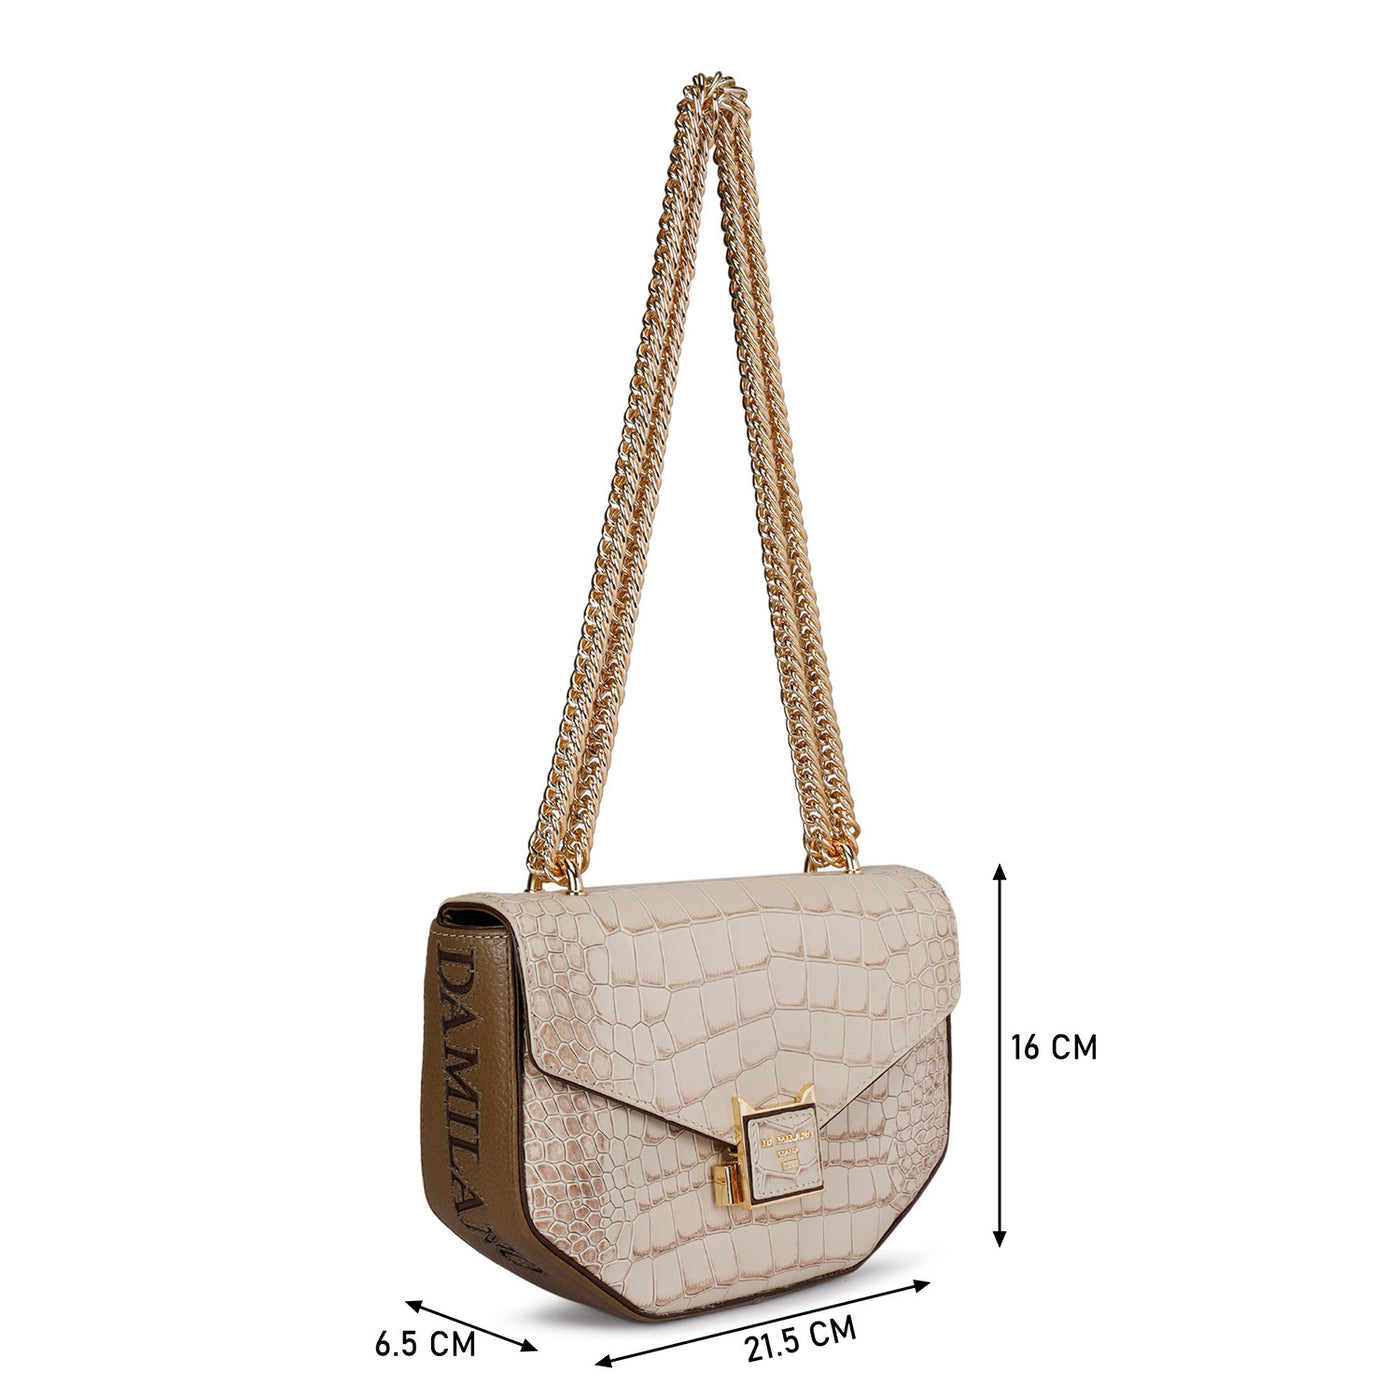 Small Croco Leather Shoulder Bag - Frost